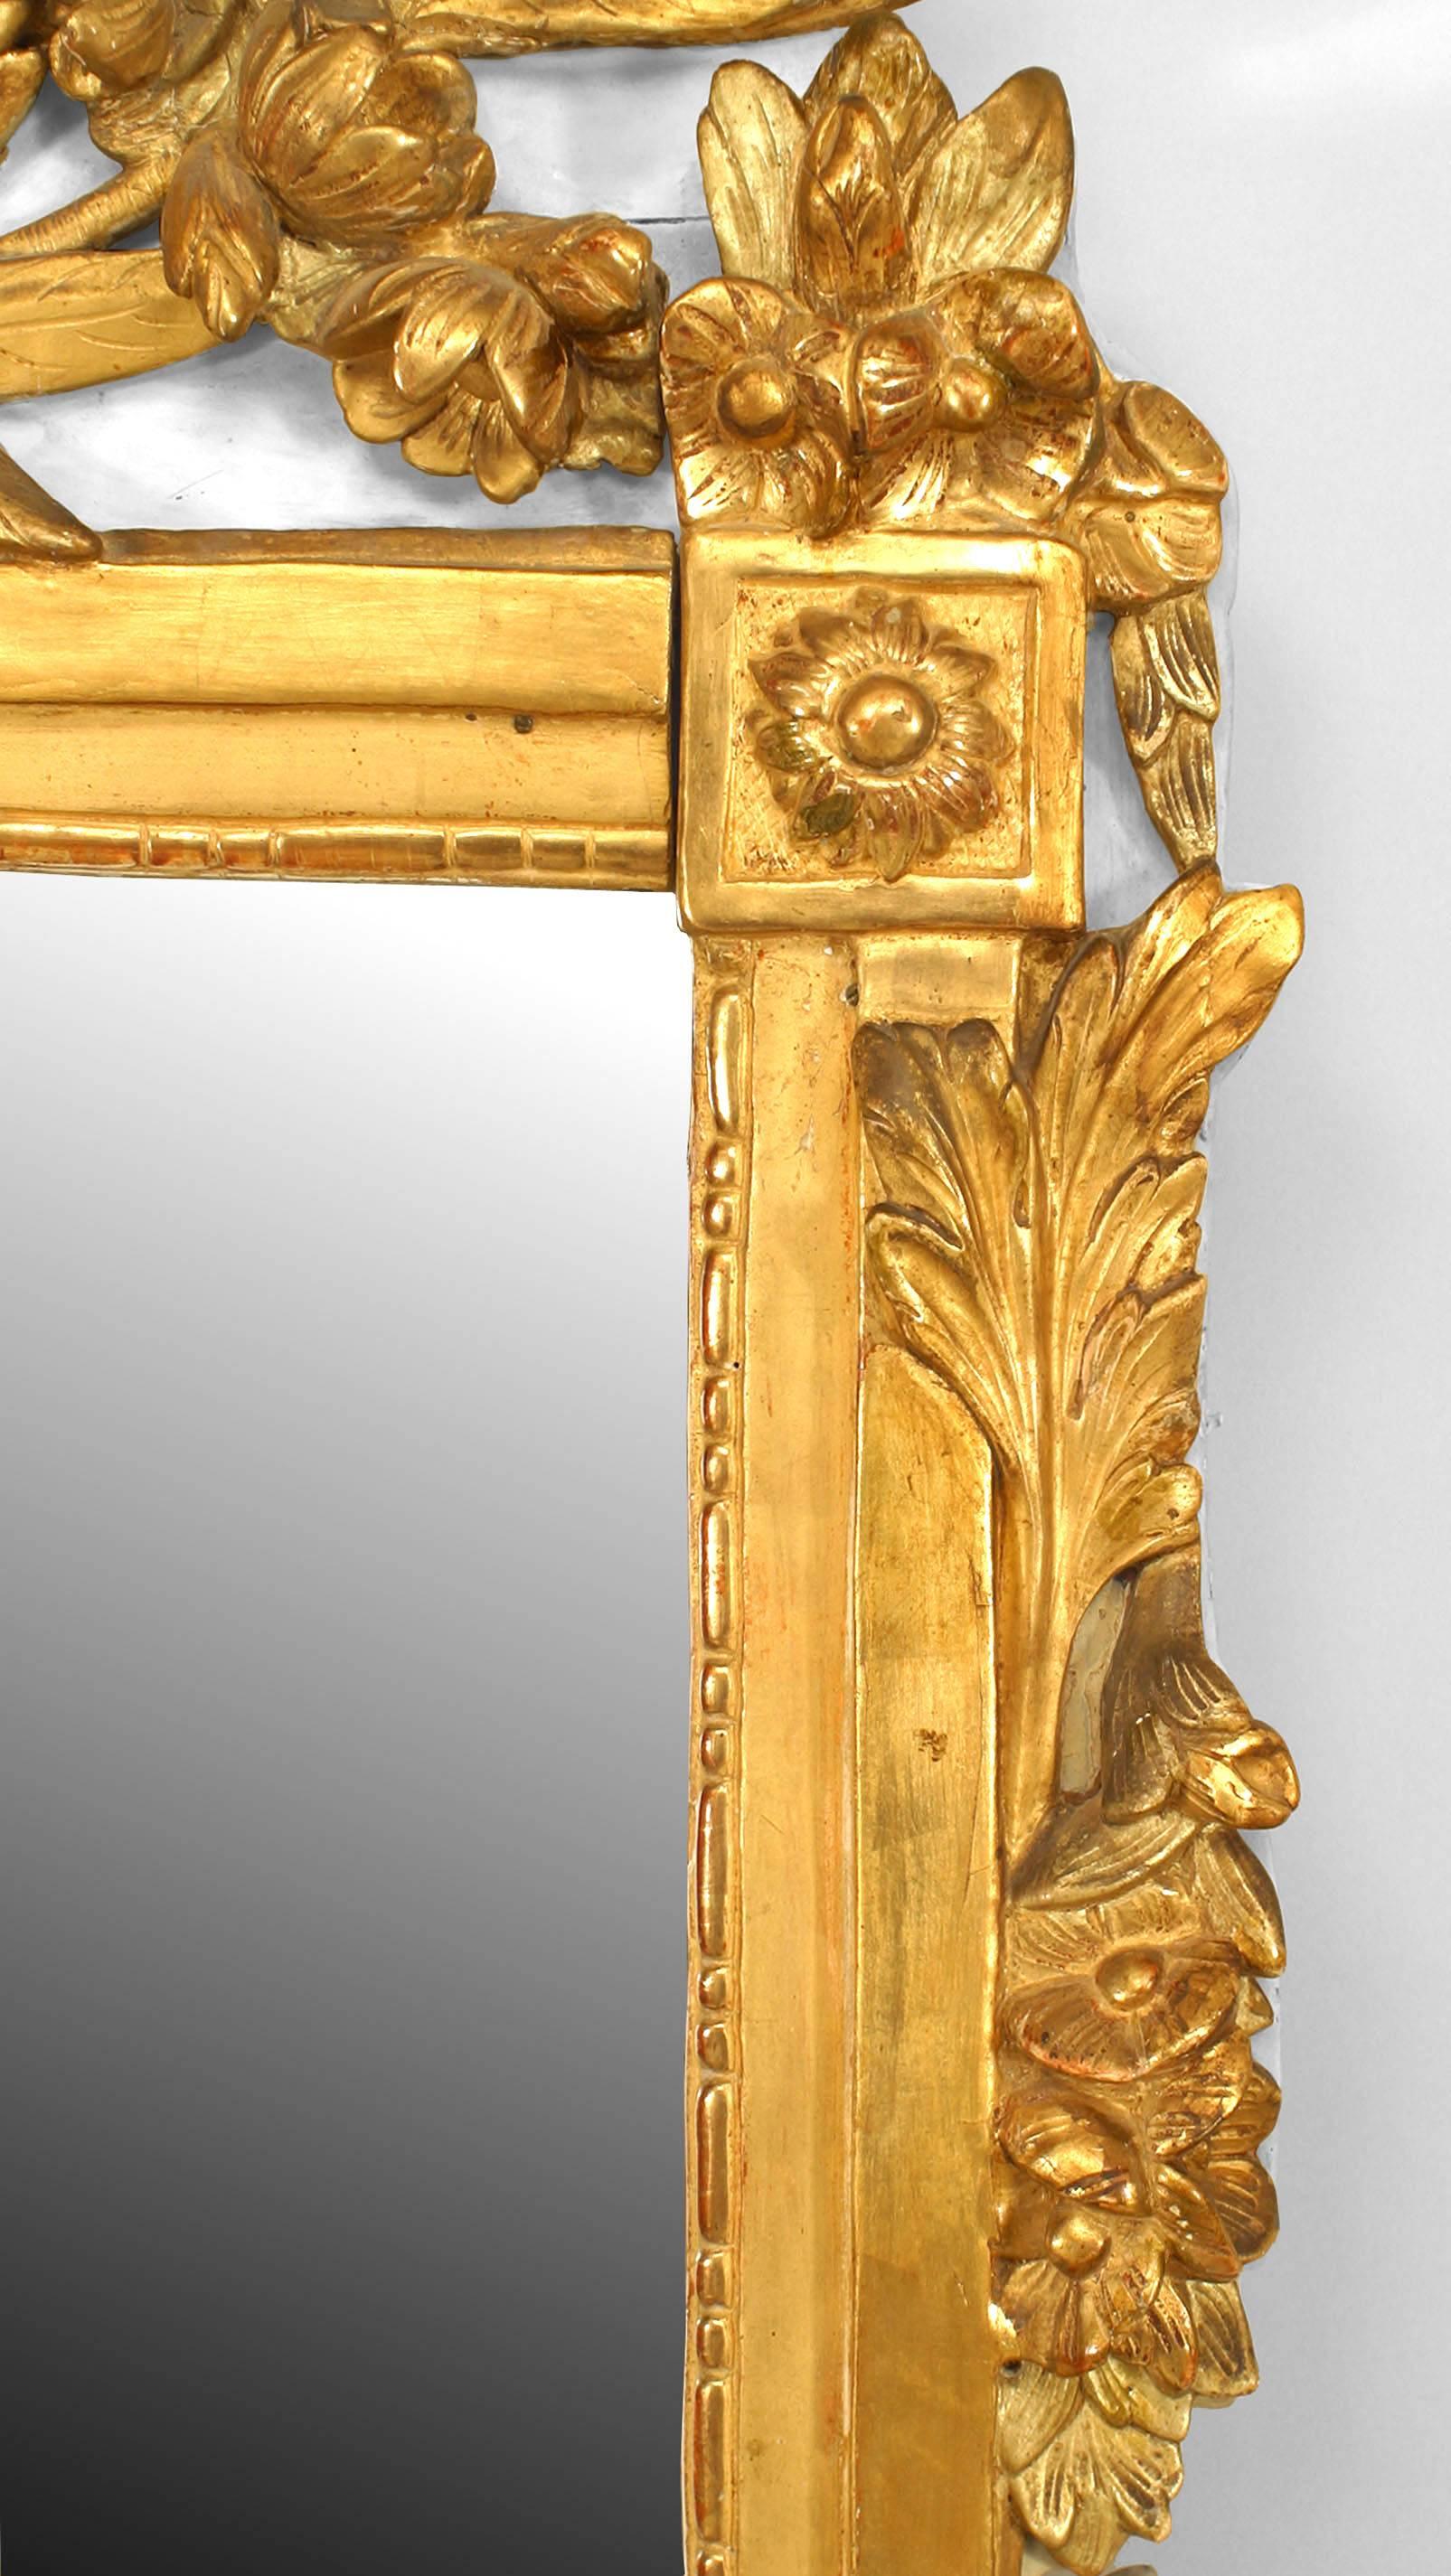 Italian Neoclassic (18th Century) carved giltwood and cream painted wall mirror with carved leaves and urn pediment top.
